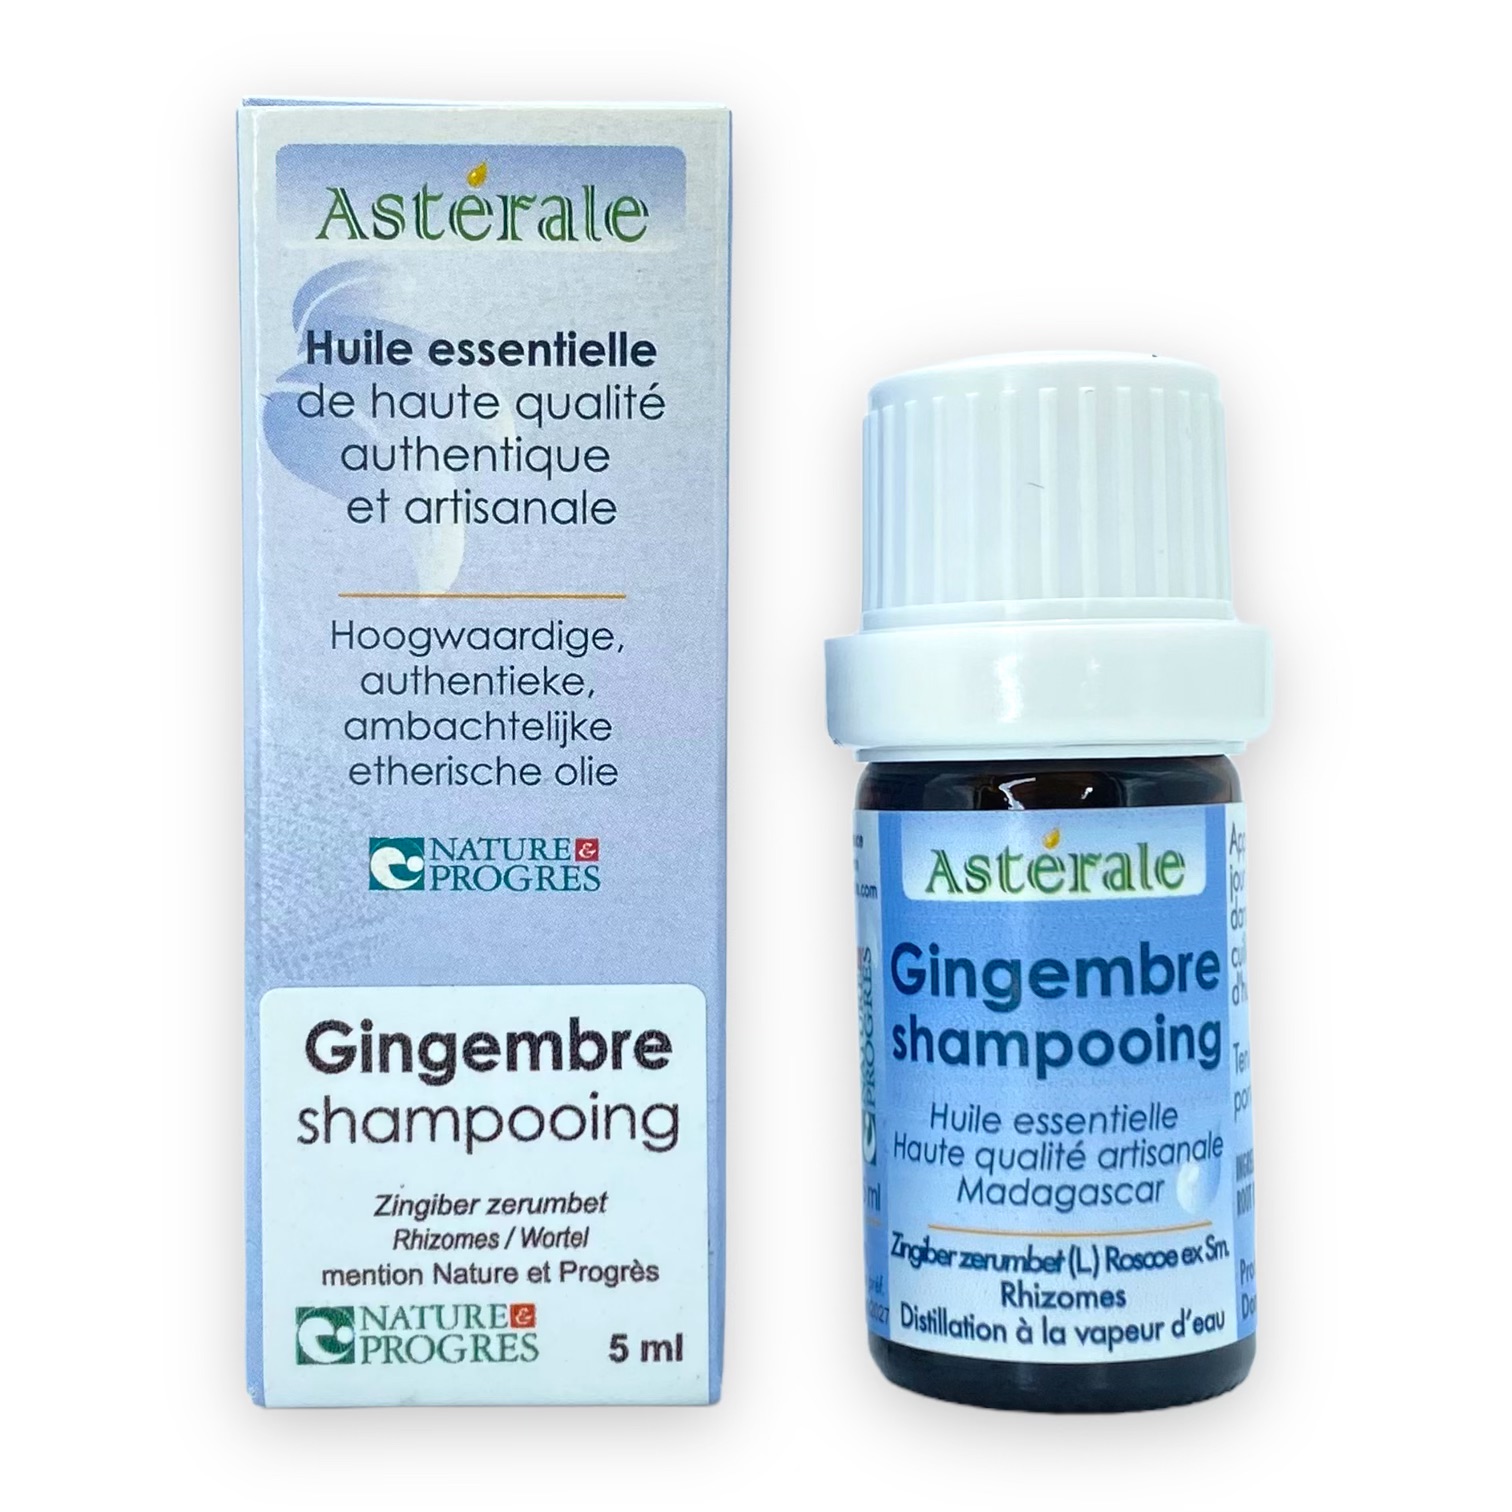 Huile essentielle Gingembre shampooing (Zerumbet)Astérale